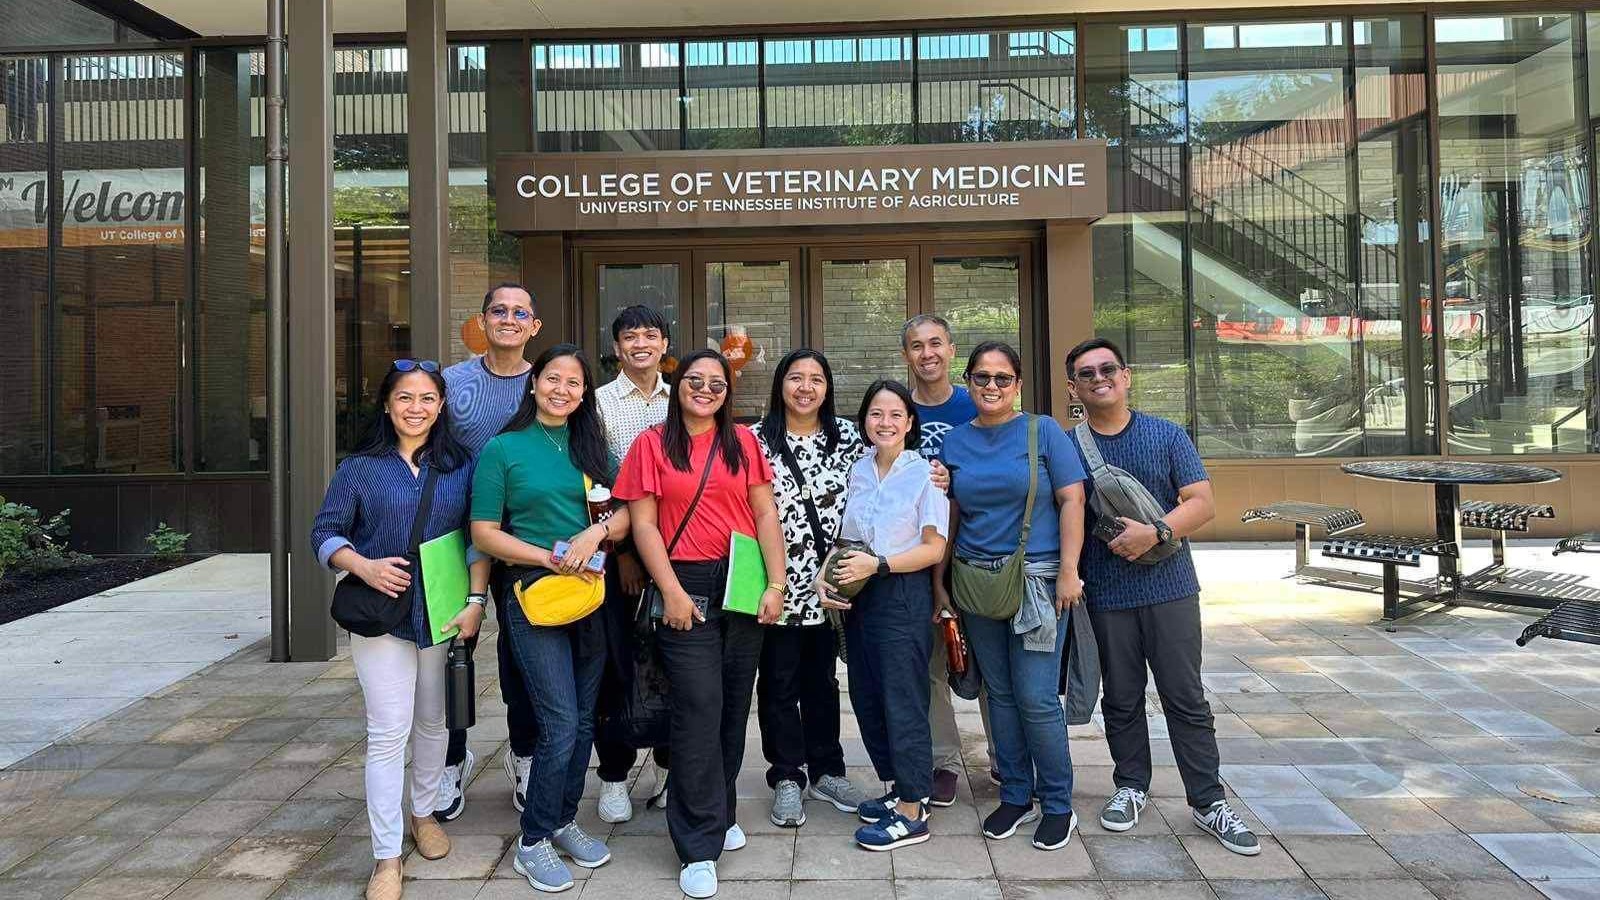 Fellows pictured in front of the College of Veterinary Medicine Teaching and Learning Center